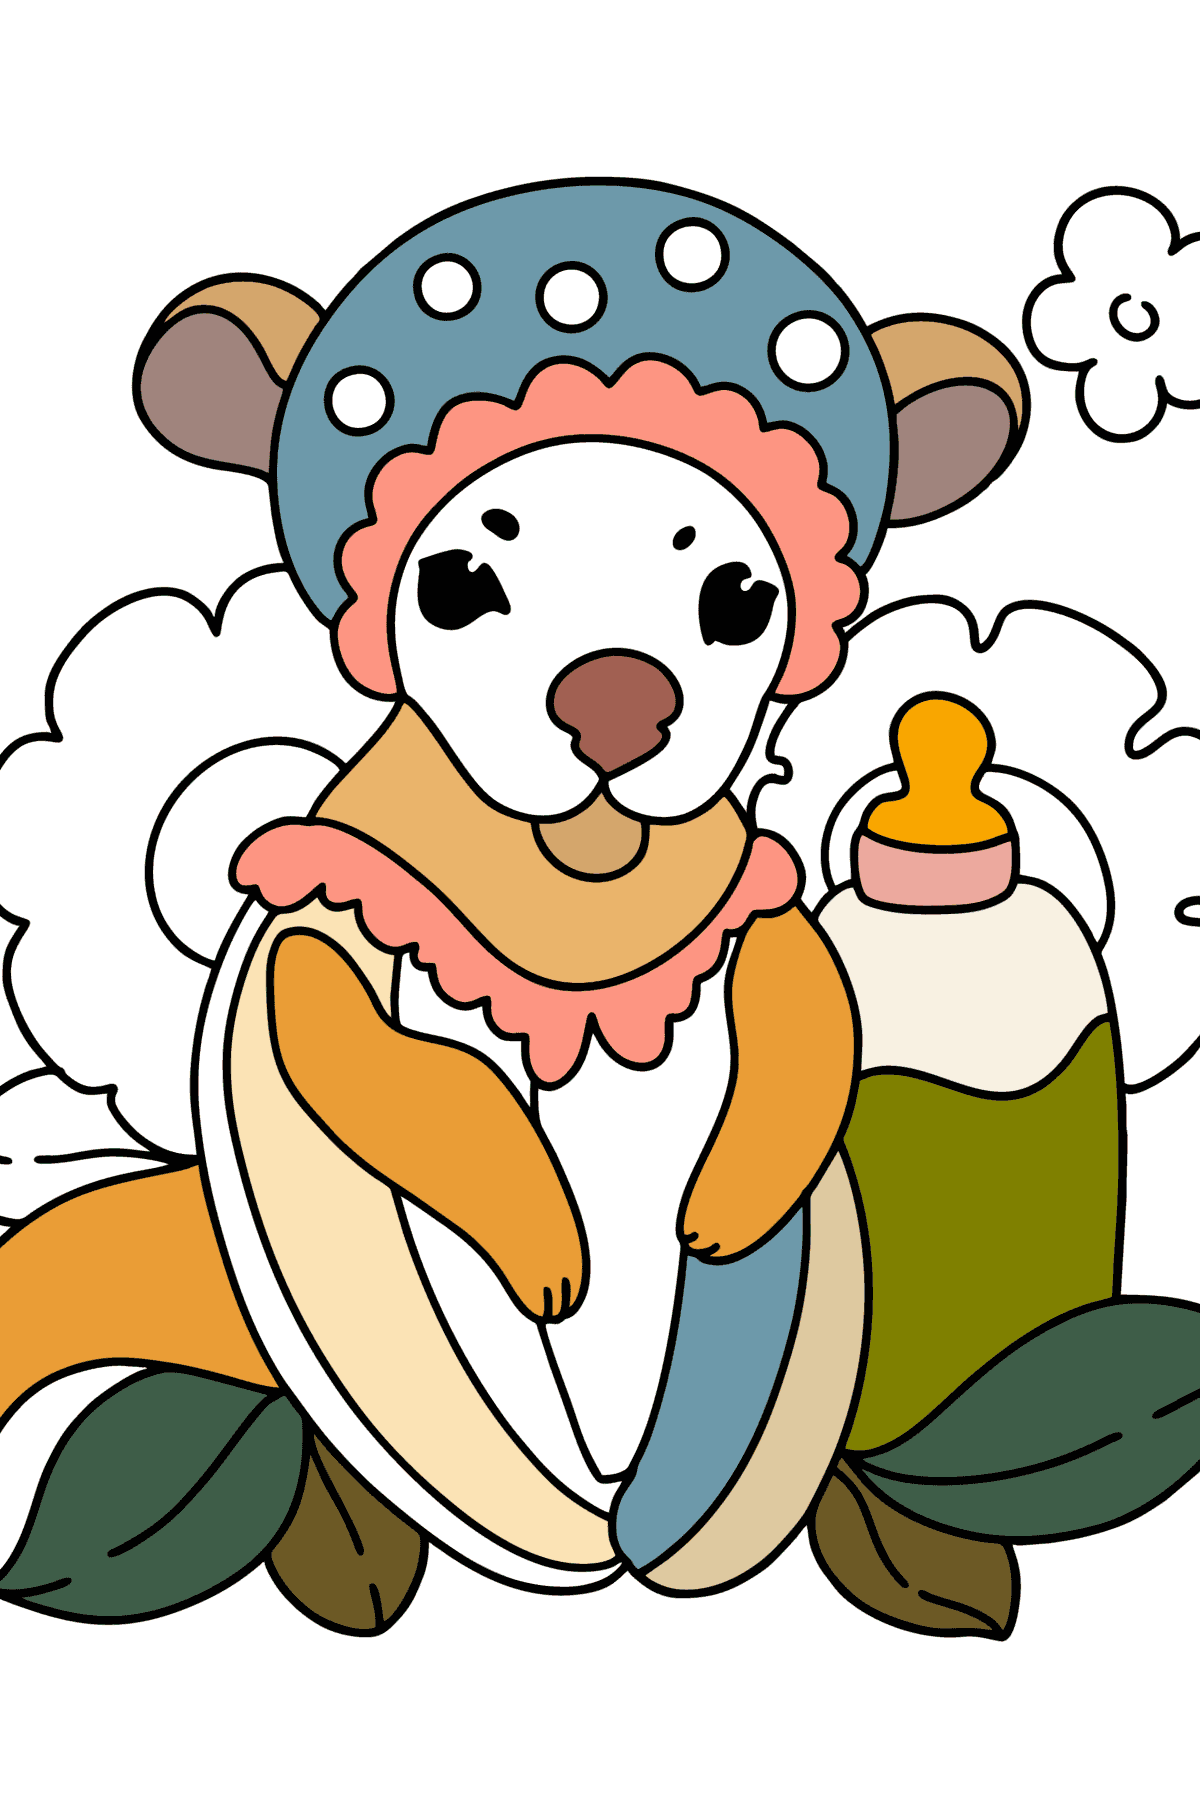 Complex Coloring page - Cartoon Baby Kangaroo - Coloring Pages for Kids